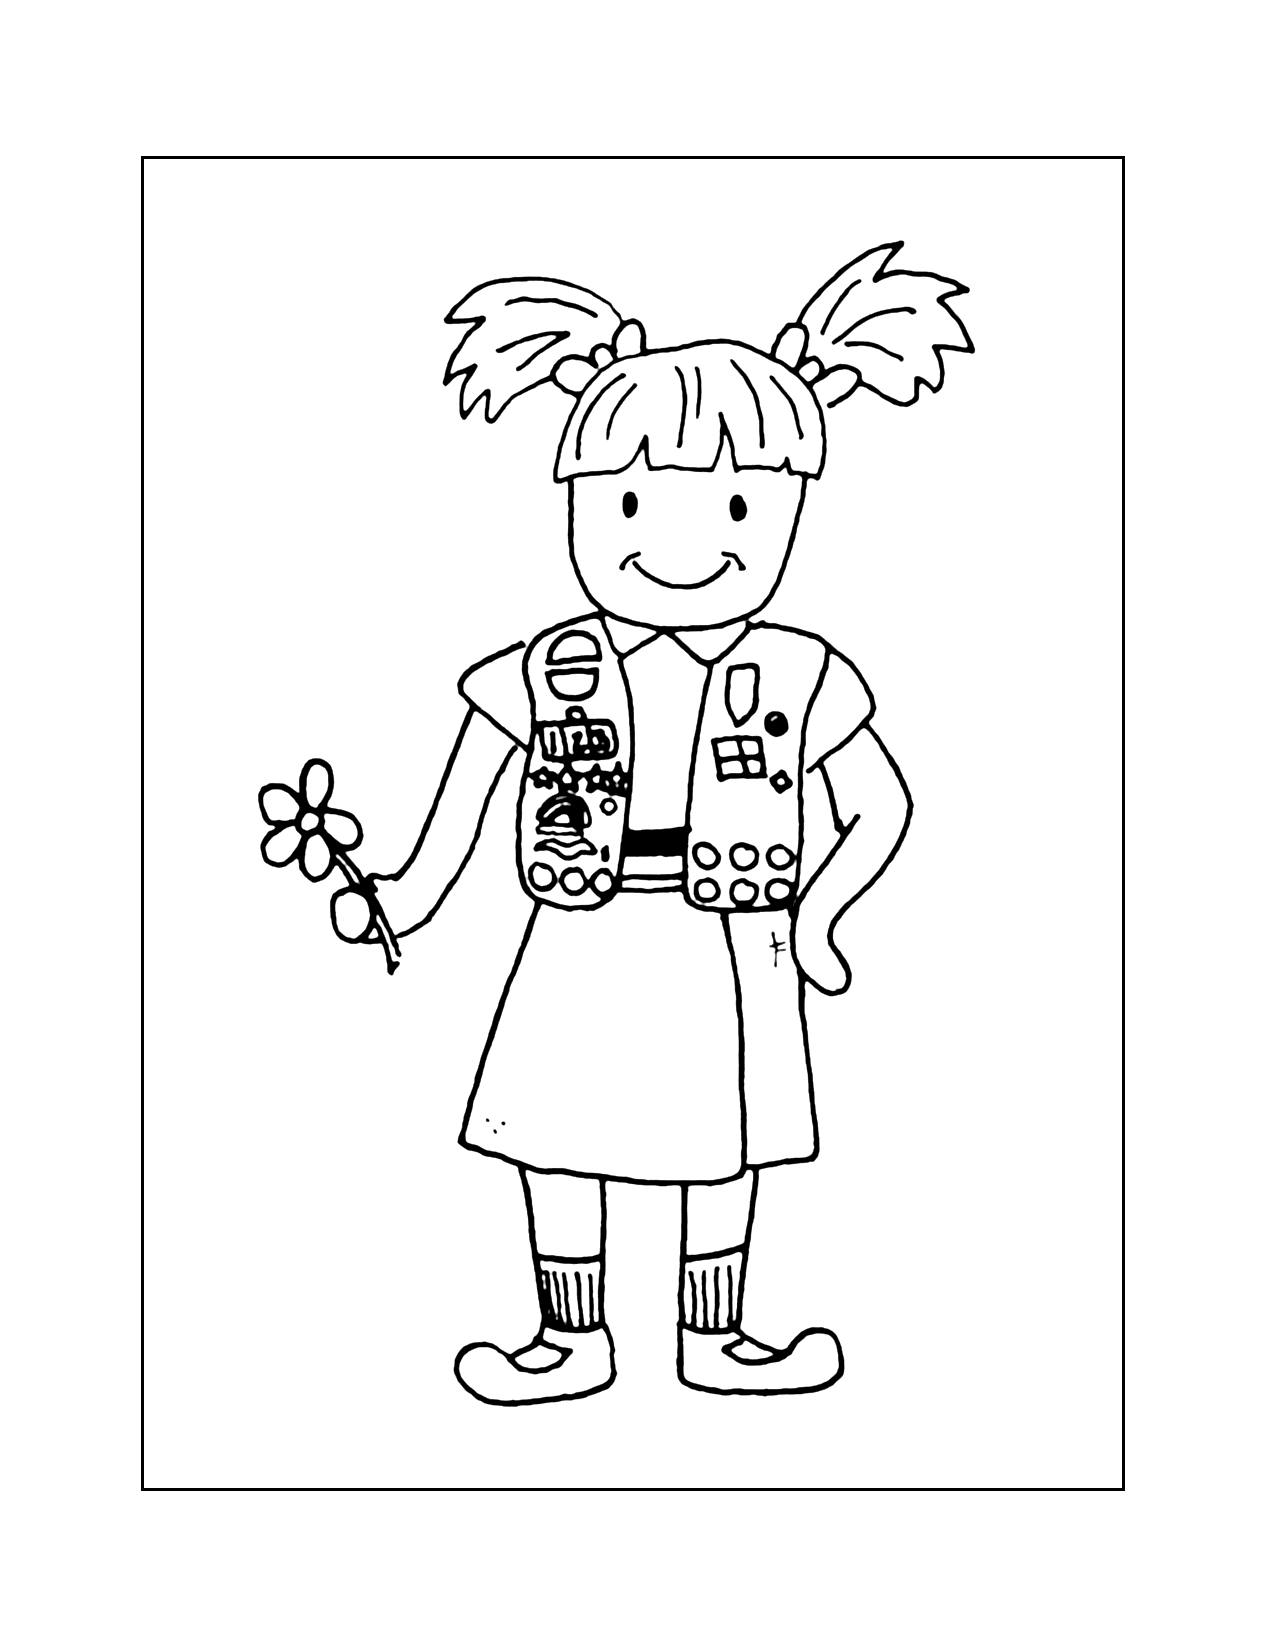 Girl Scout Coloring Page